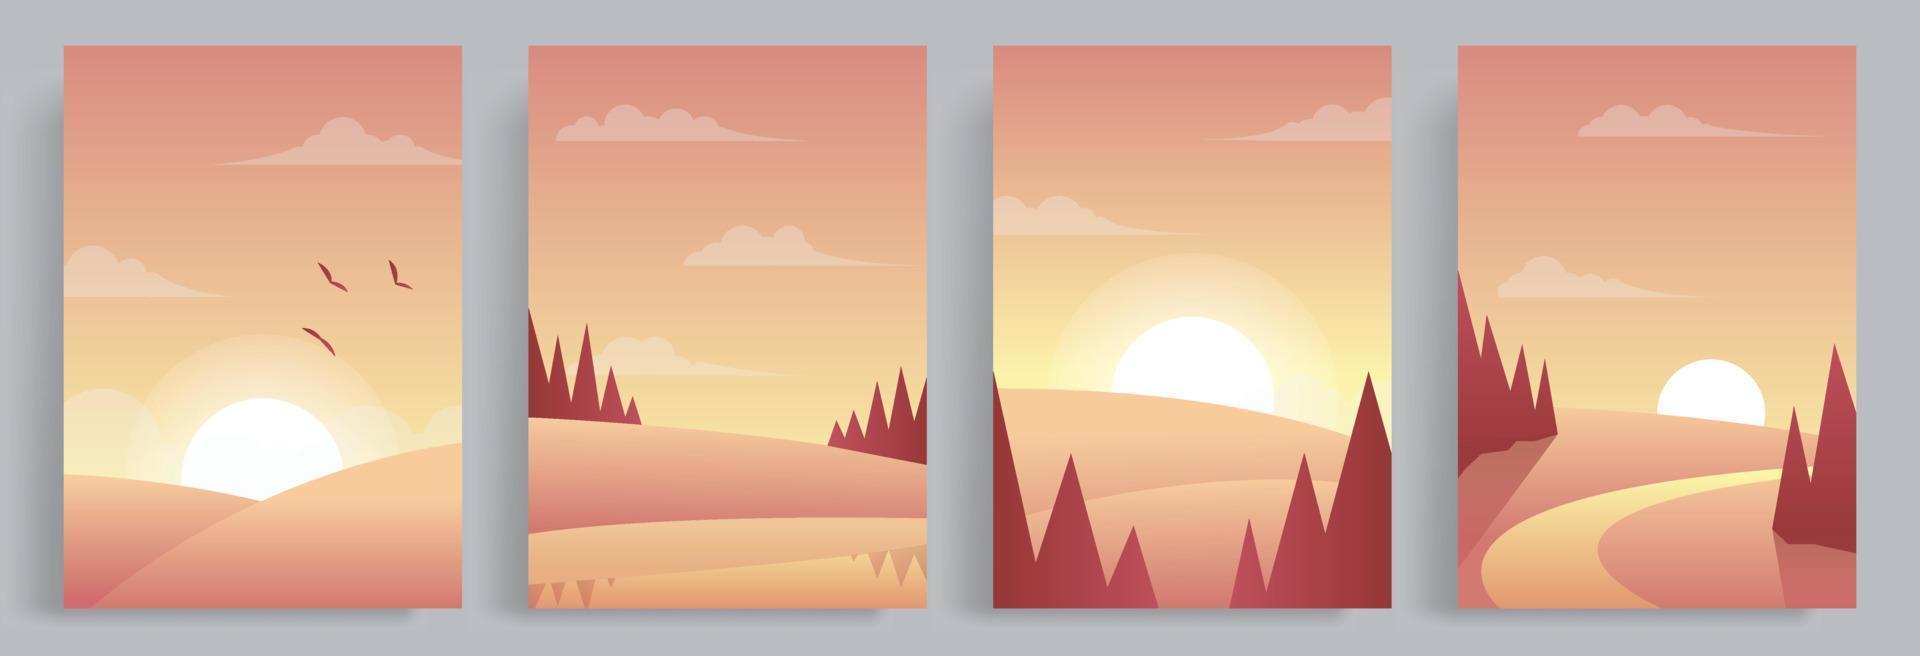 4 collections of autumn vector illustrations with a warm, hygge and cozy atmosphere. The view of the meadow and pine trees with the background of the sunset in the afternoon.